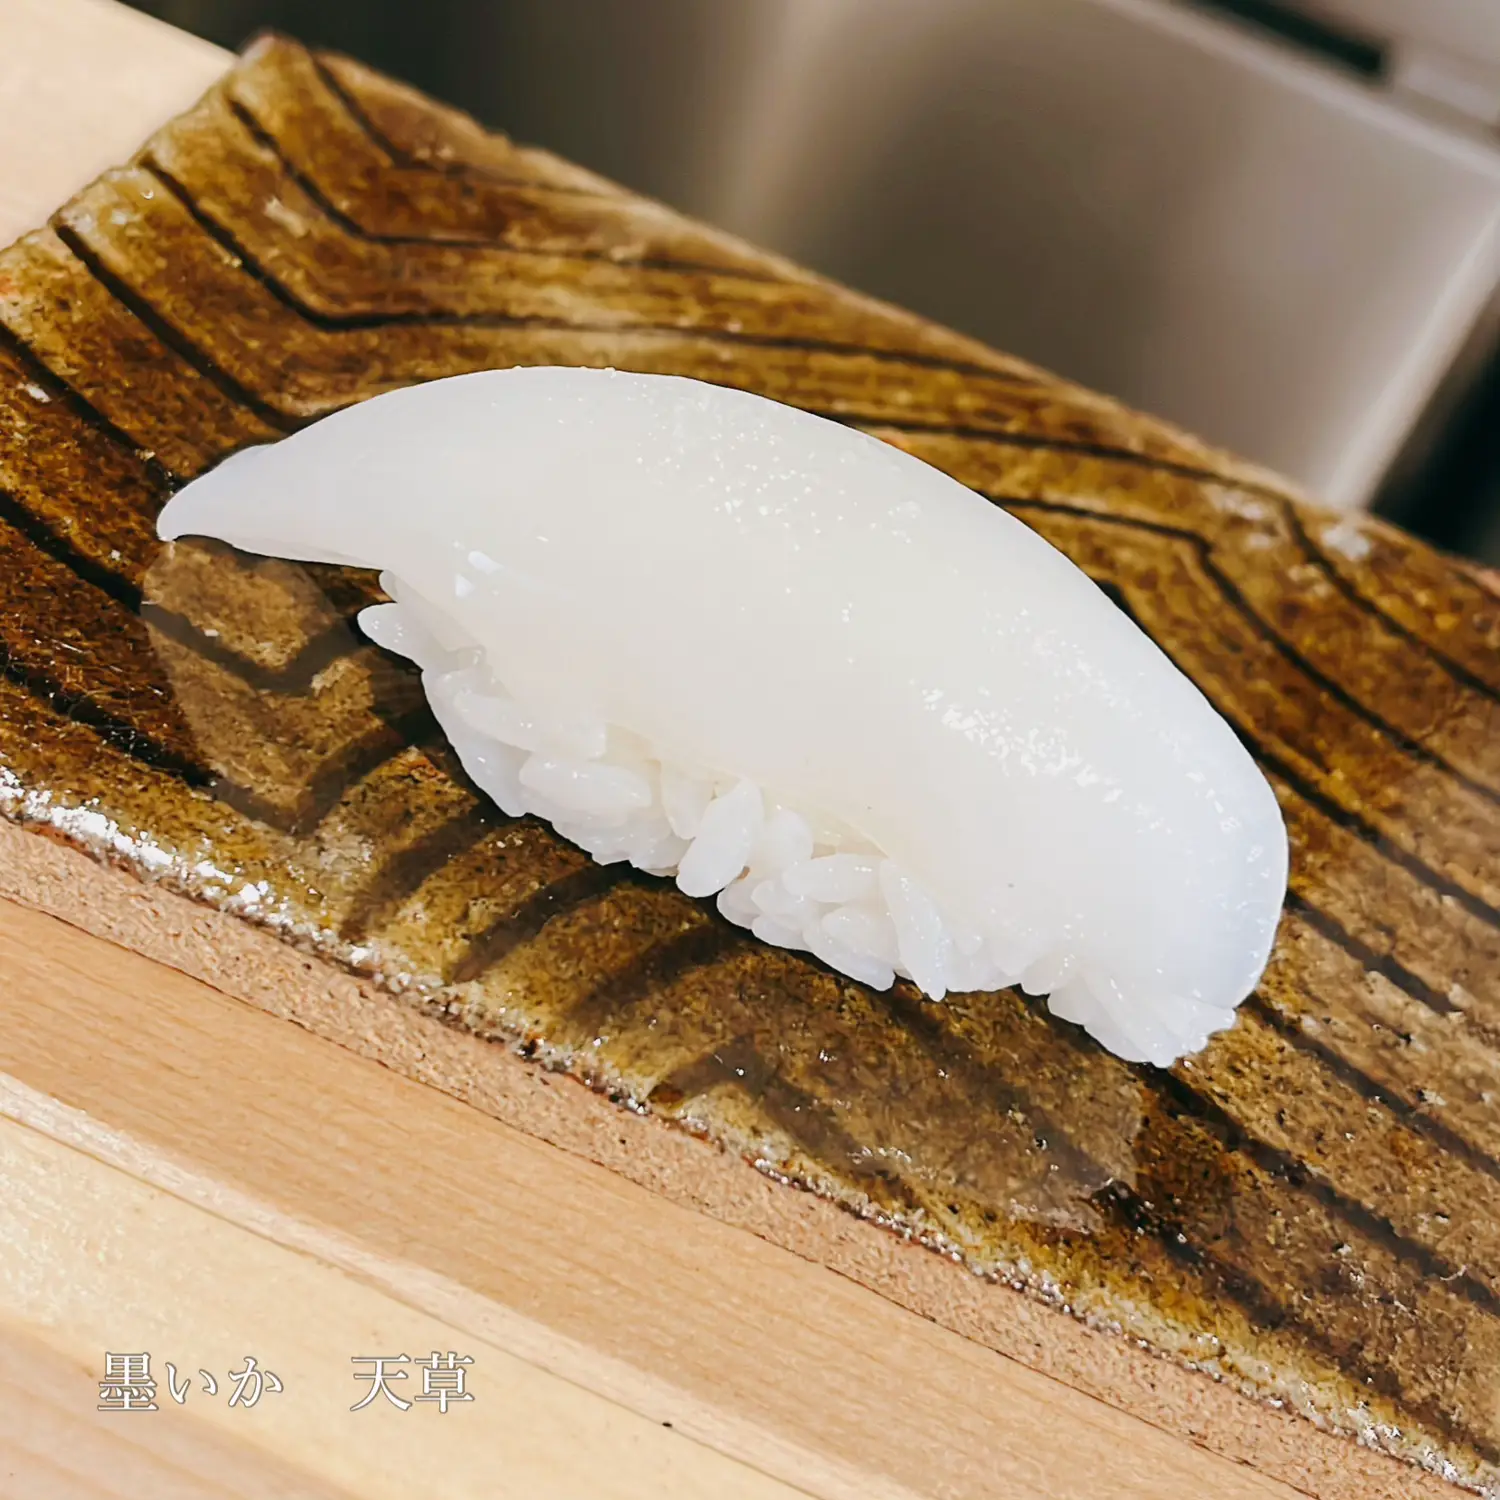 Standing sushi with wi | Gallery posted by Kazushige1215 | Lemon8